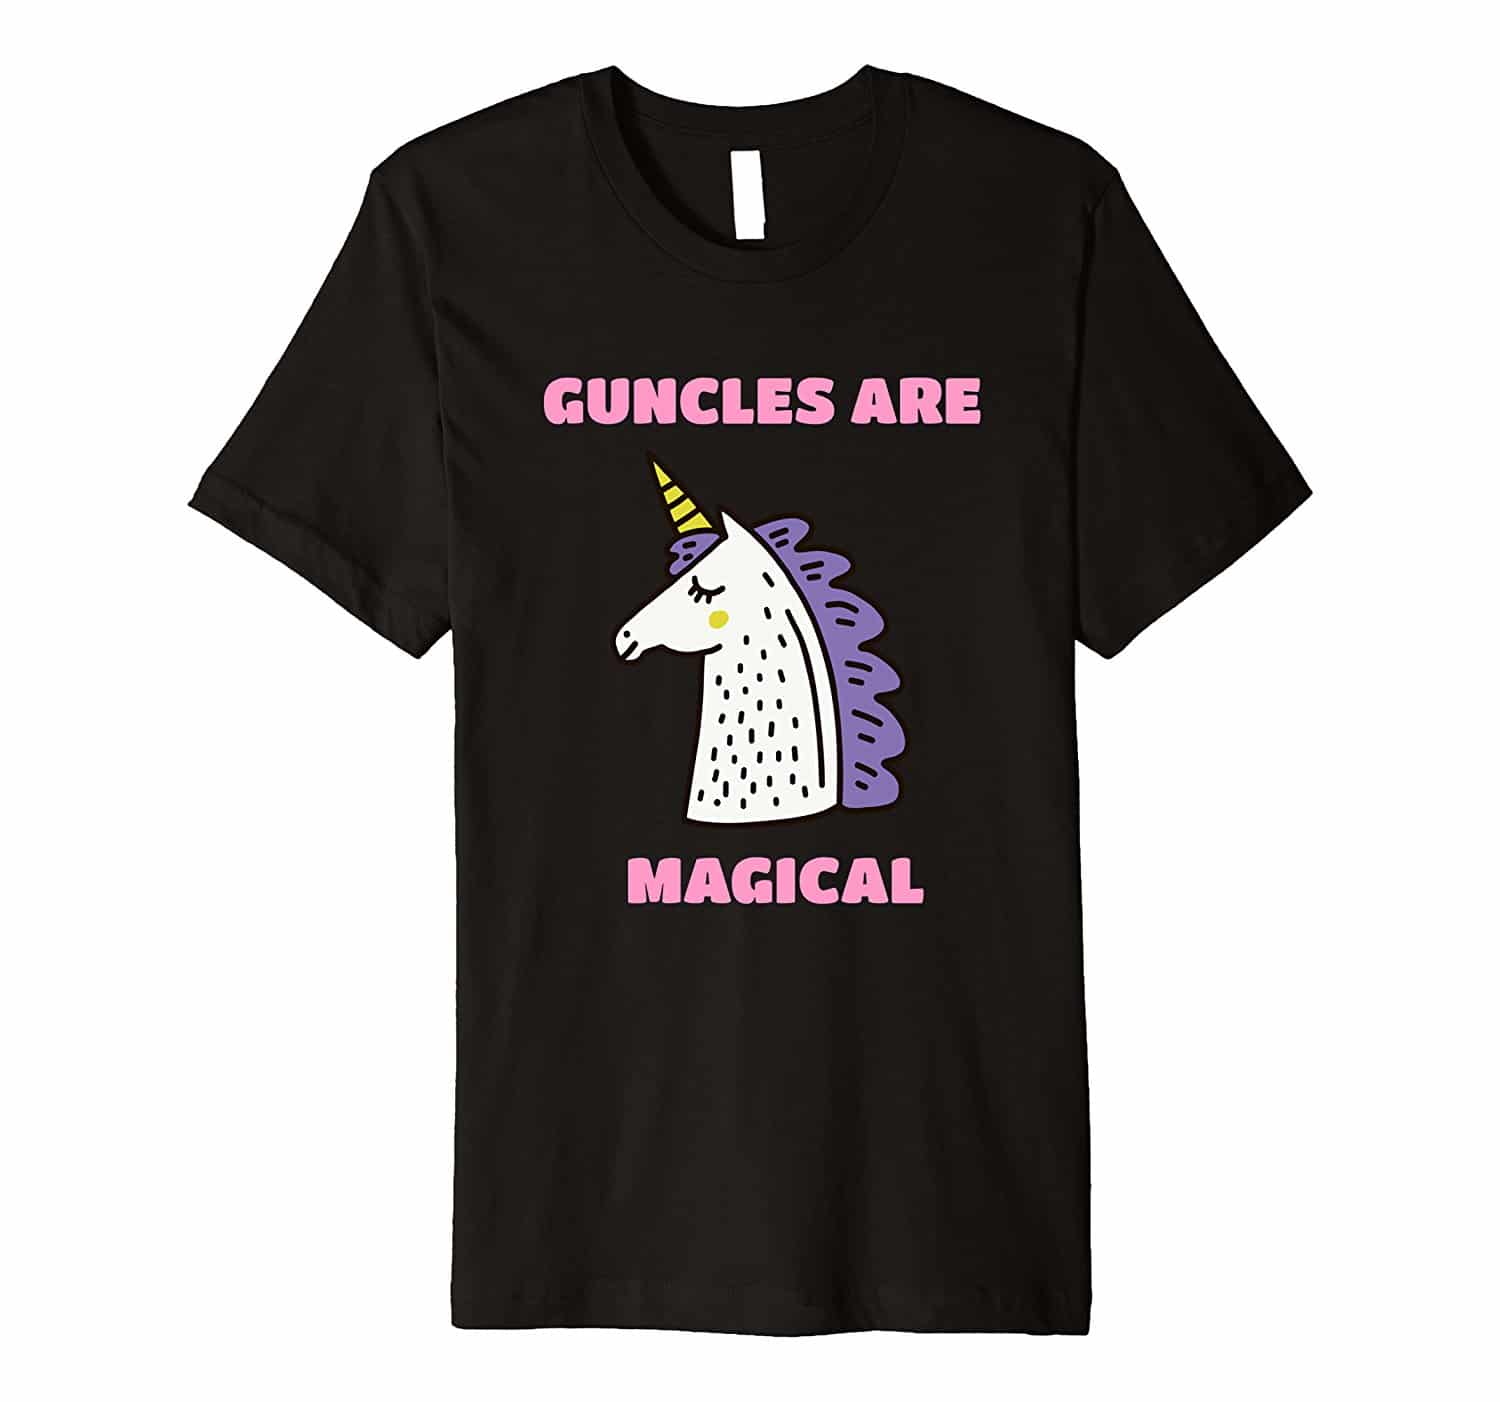 Best Gift for Guncle 2018: Guncles are Magical 2023